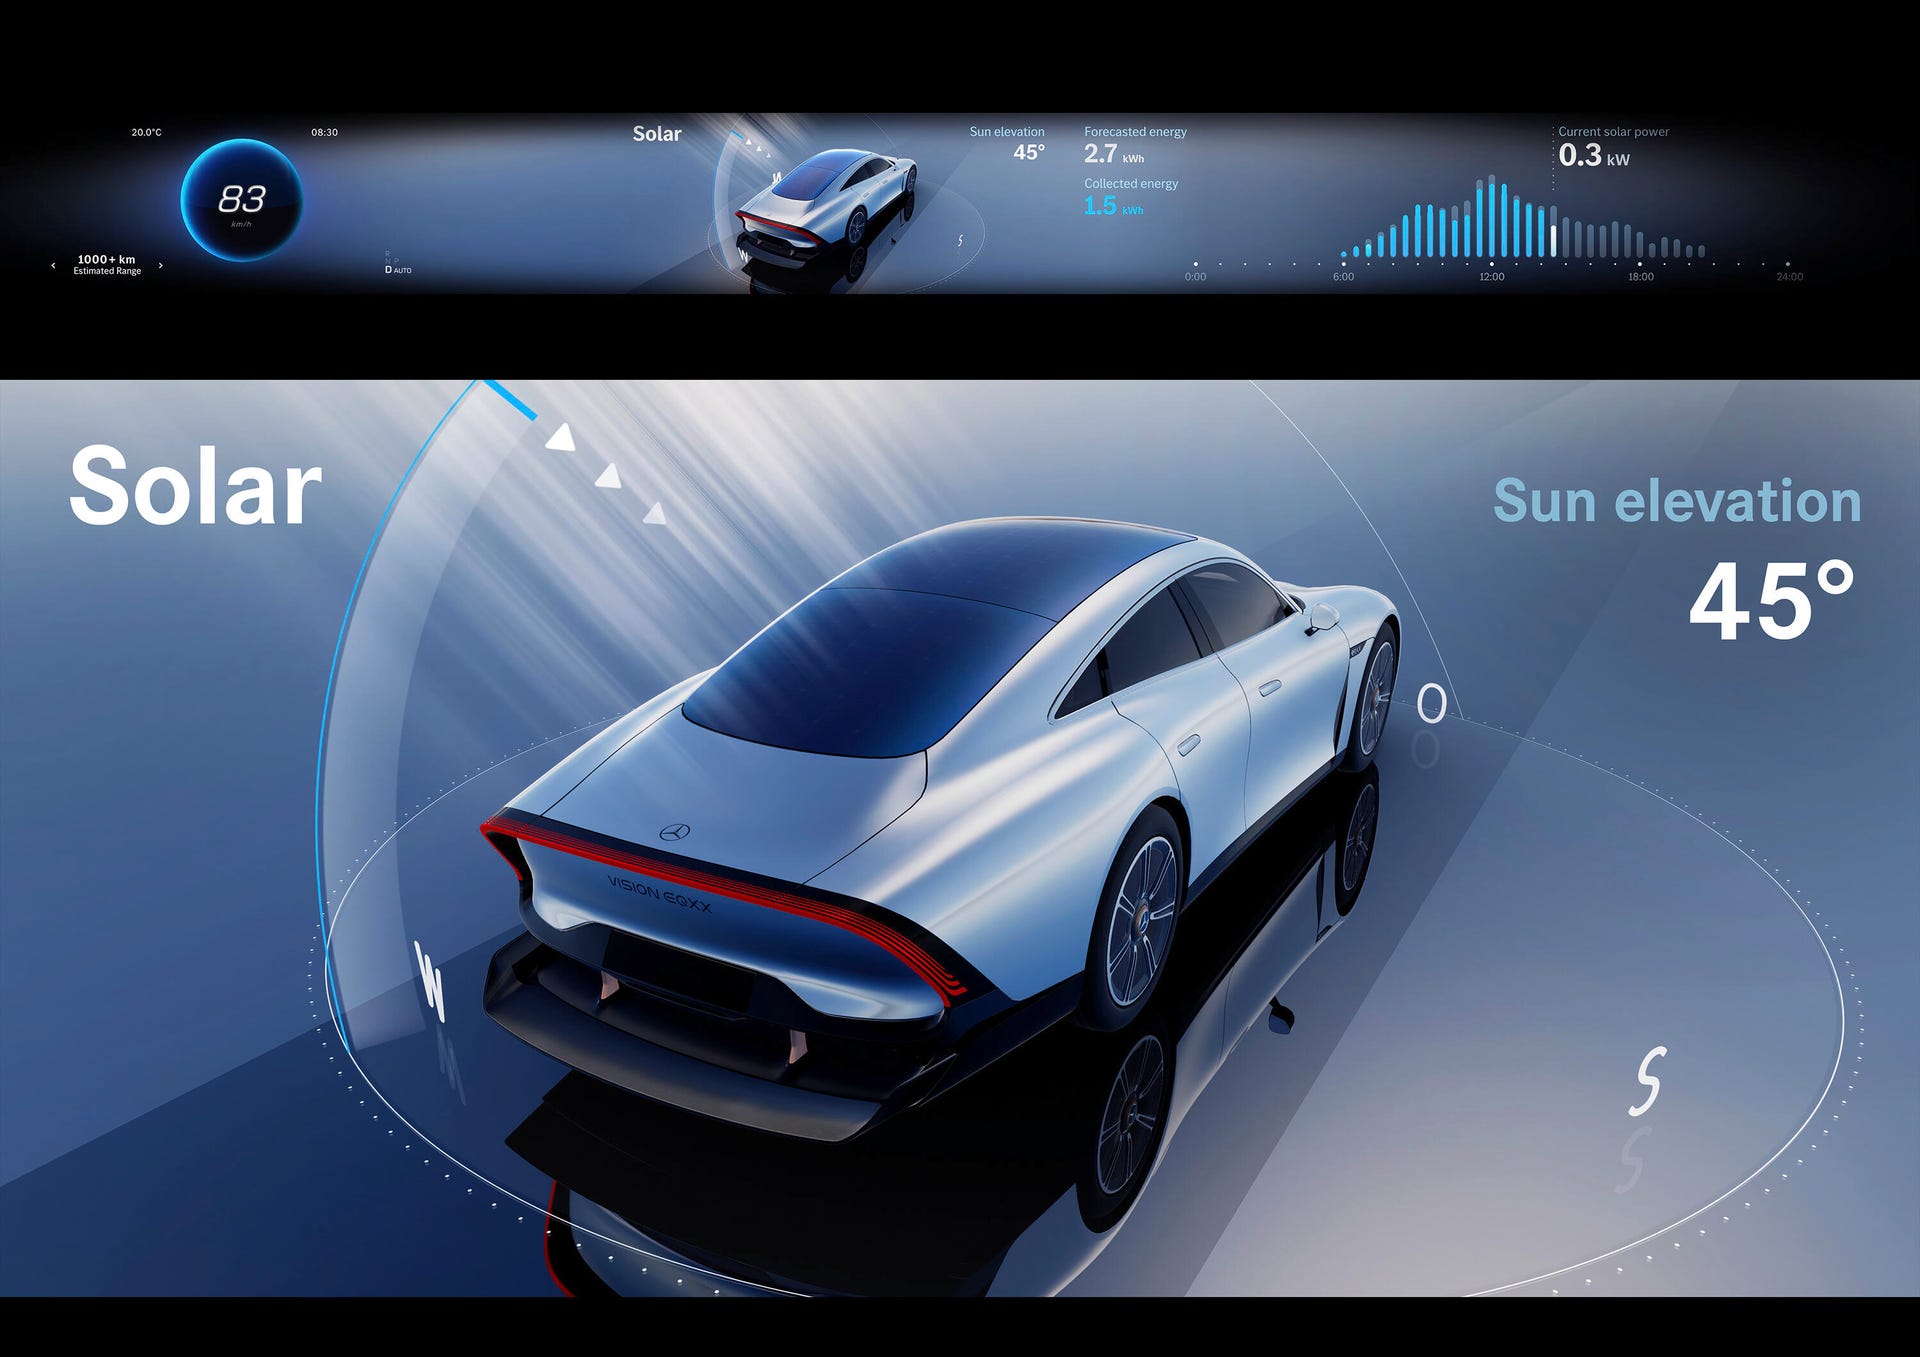 Mercedes-Benz Vision EQXX screen giving sun elevation relative to the car